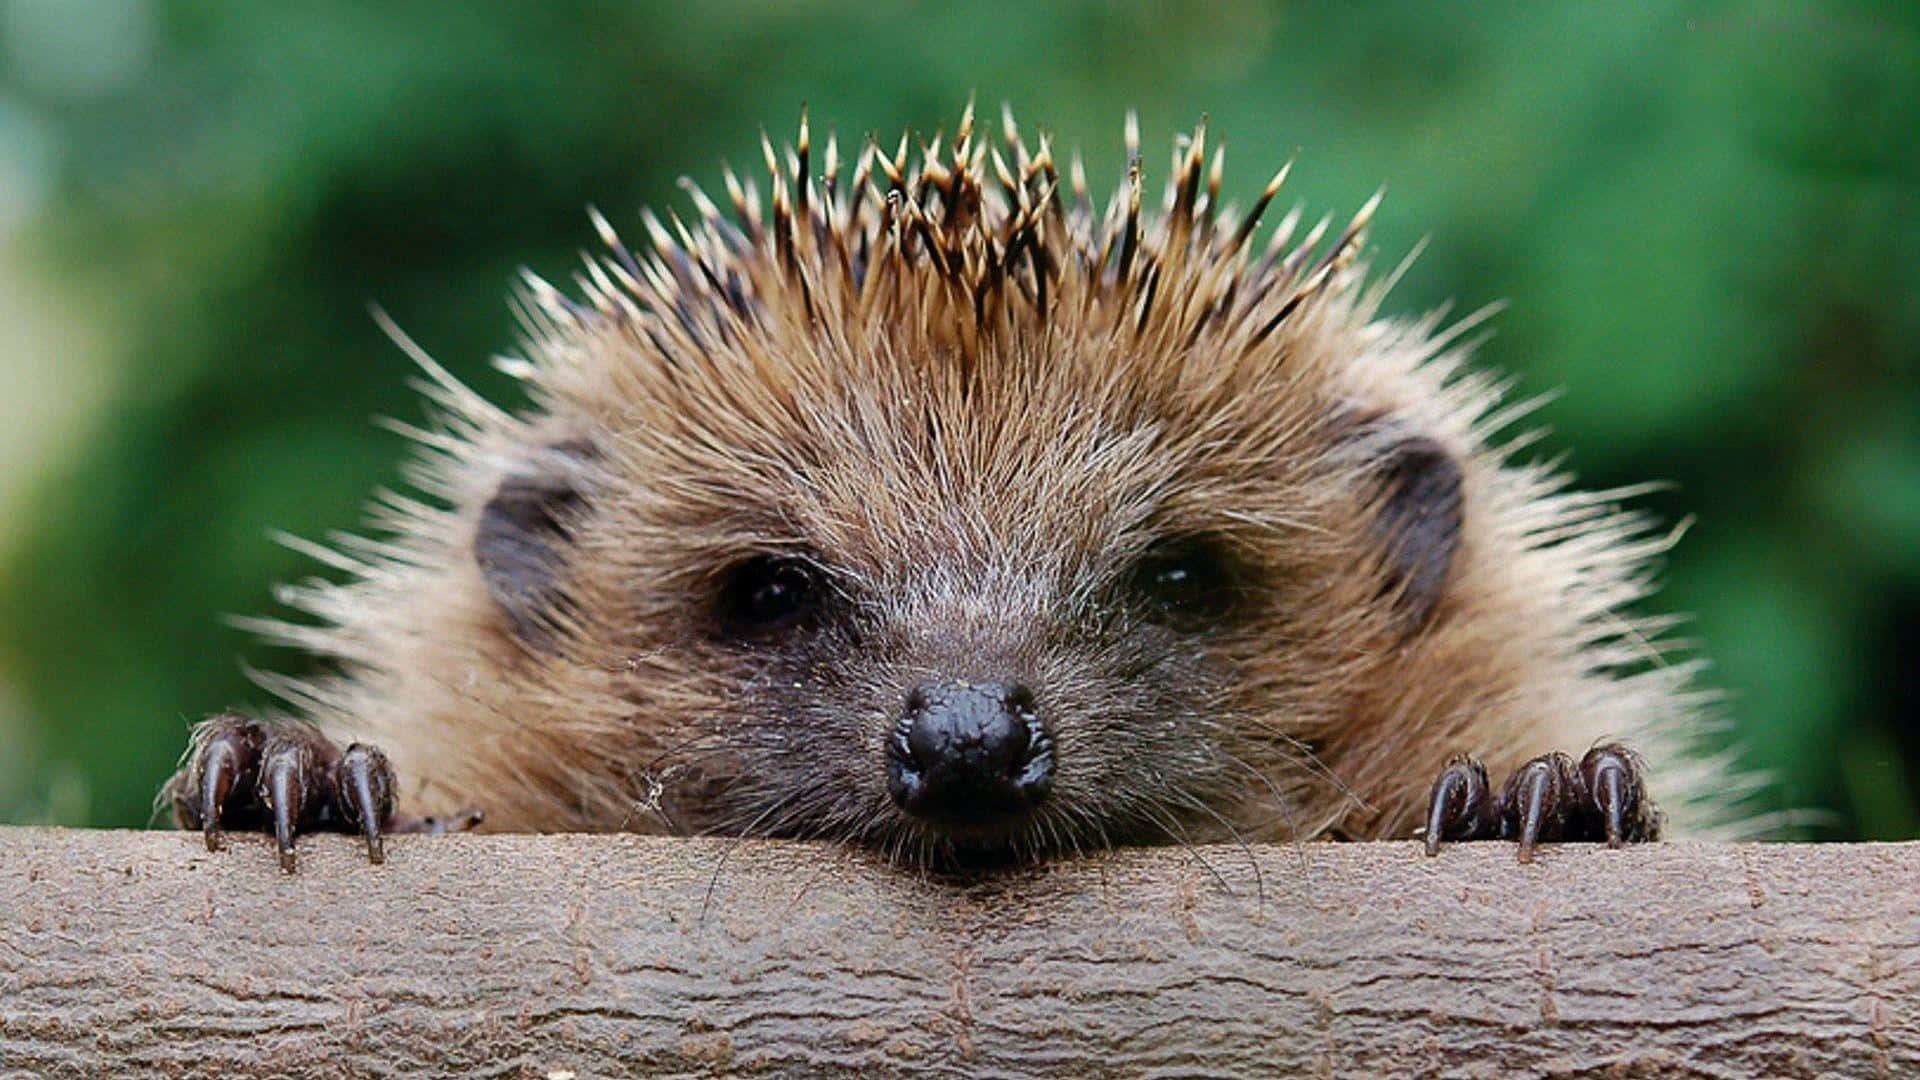 Hedgehog Looking Over A Wooden Fence Wallpaper